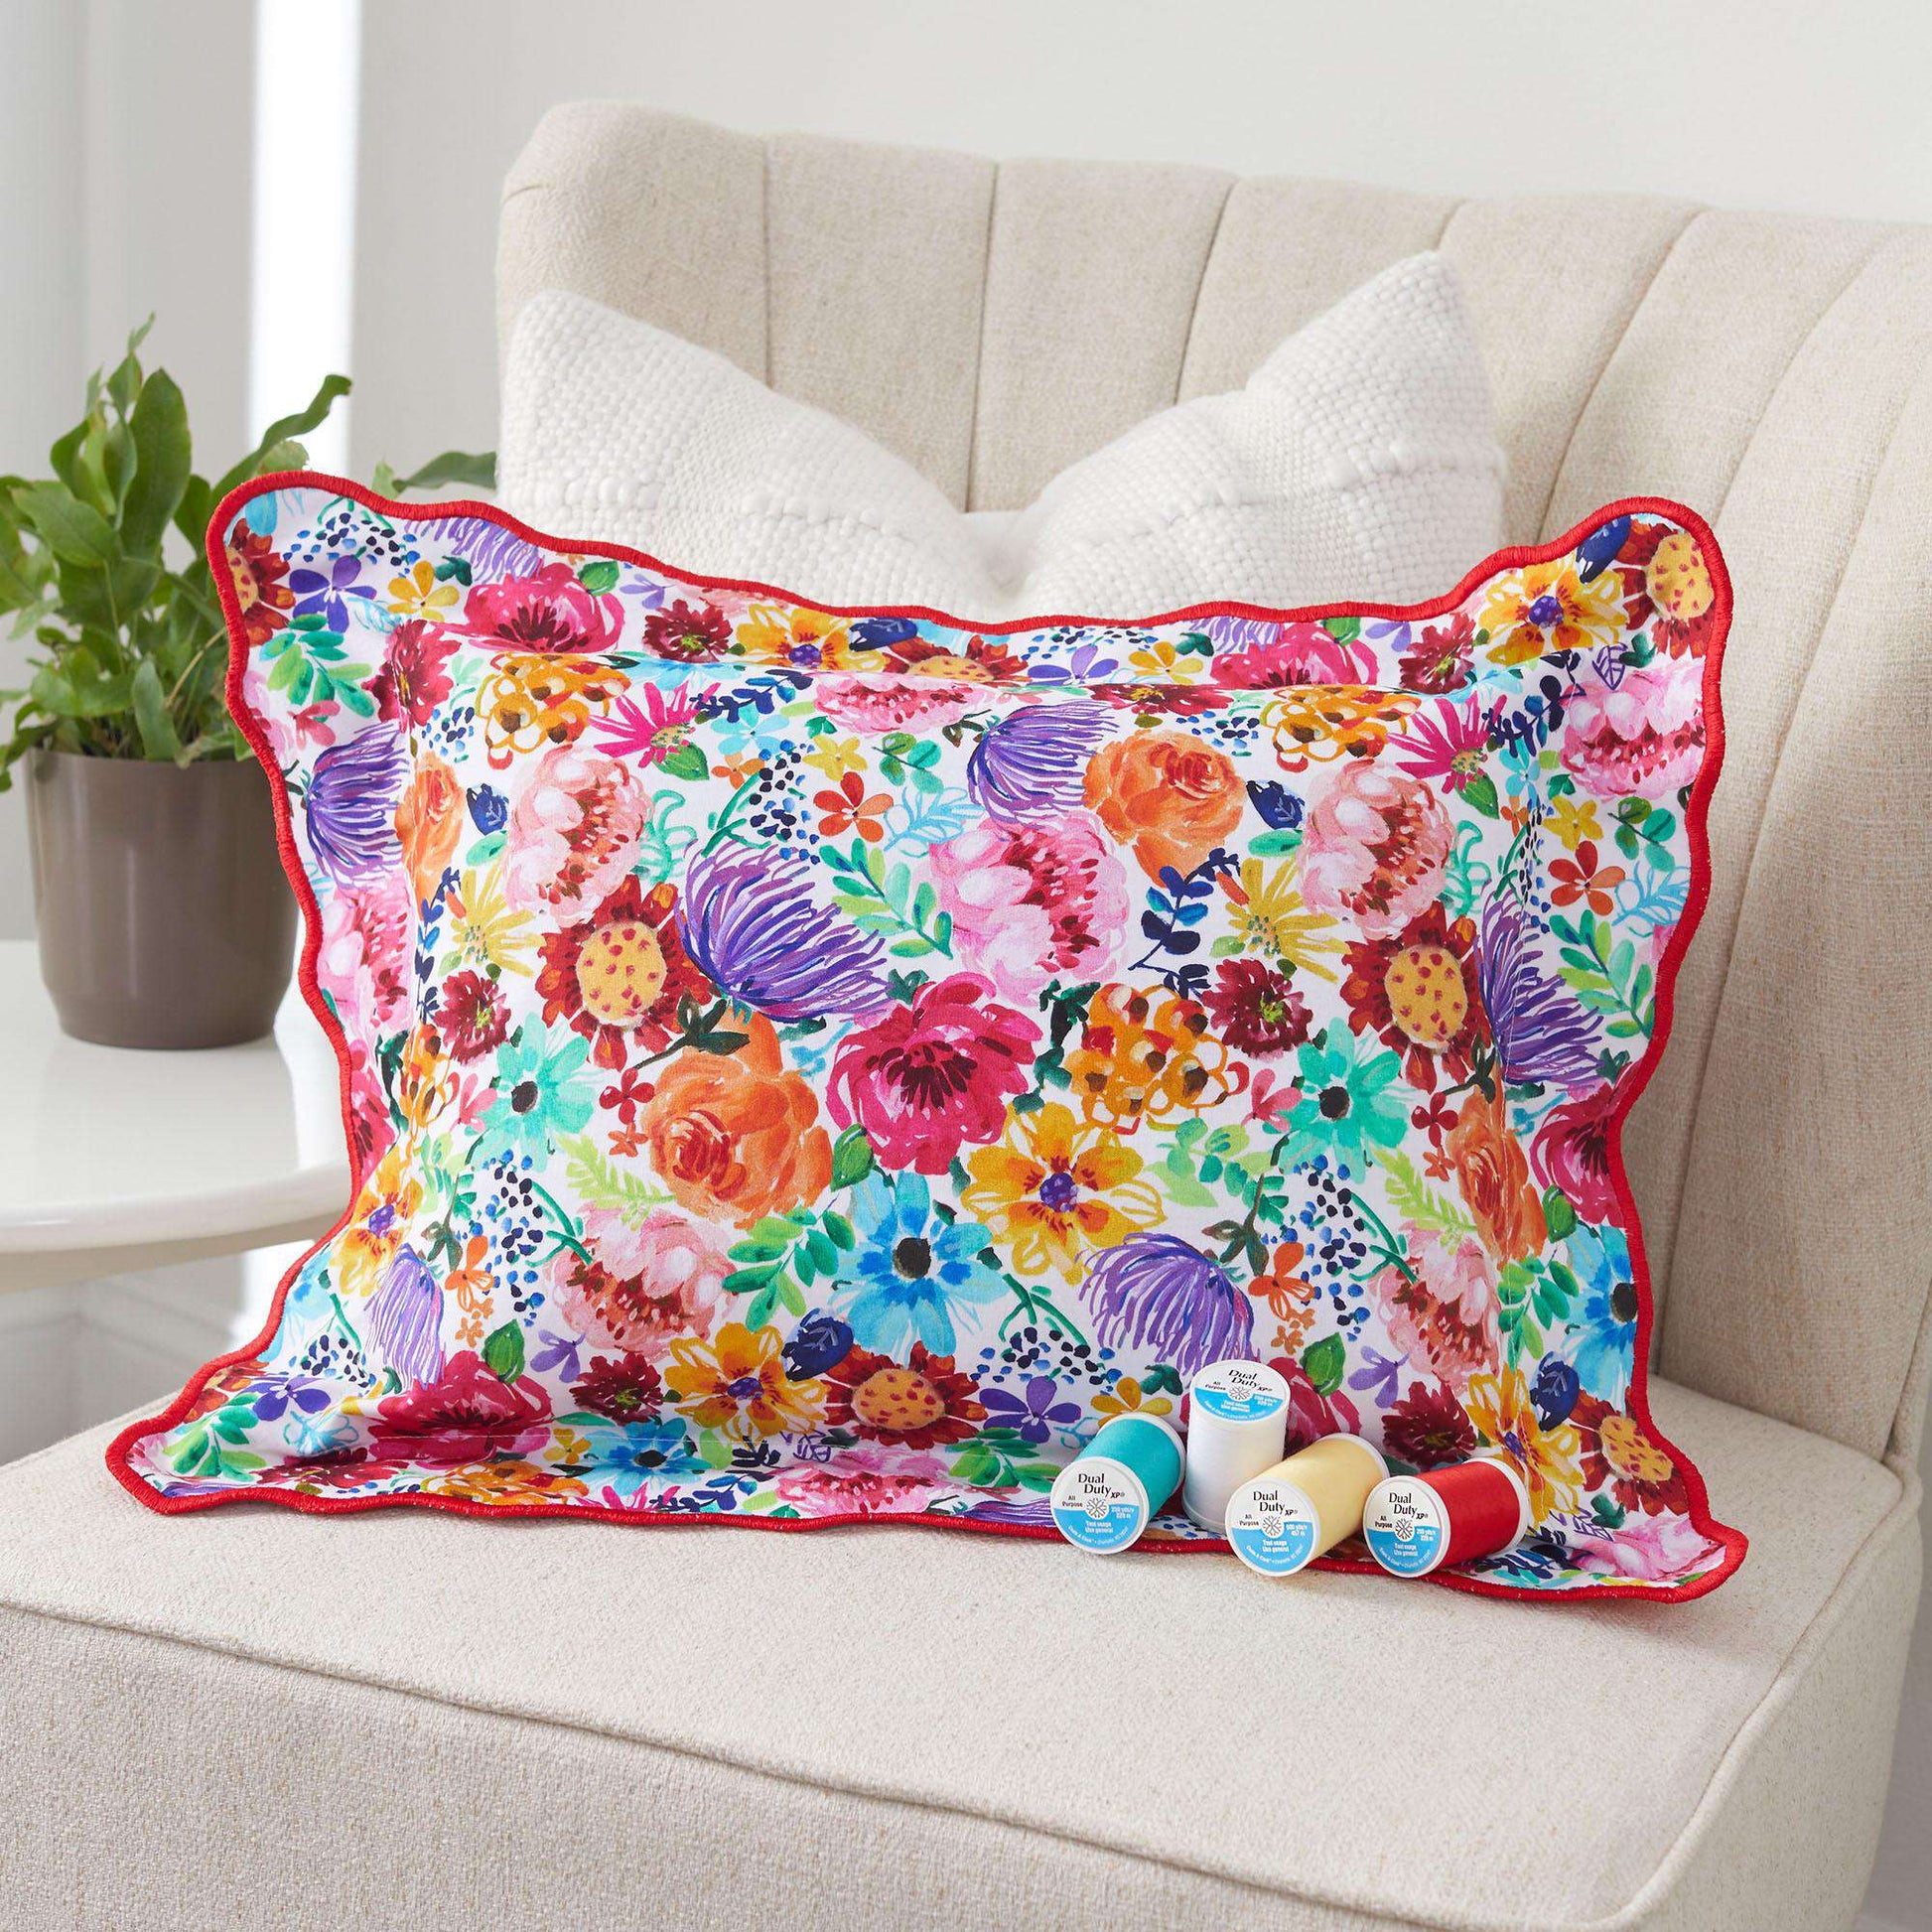 Free Coats & Clark Sewing Scalloped Edge Pillow Pattern